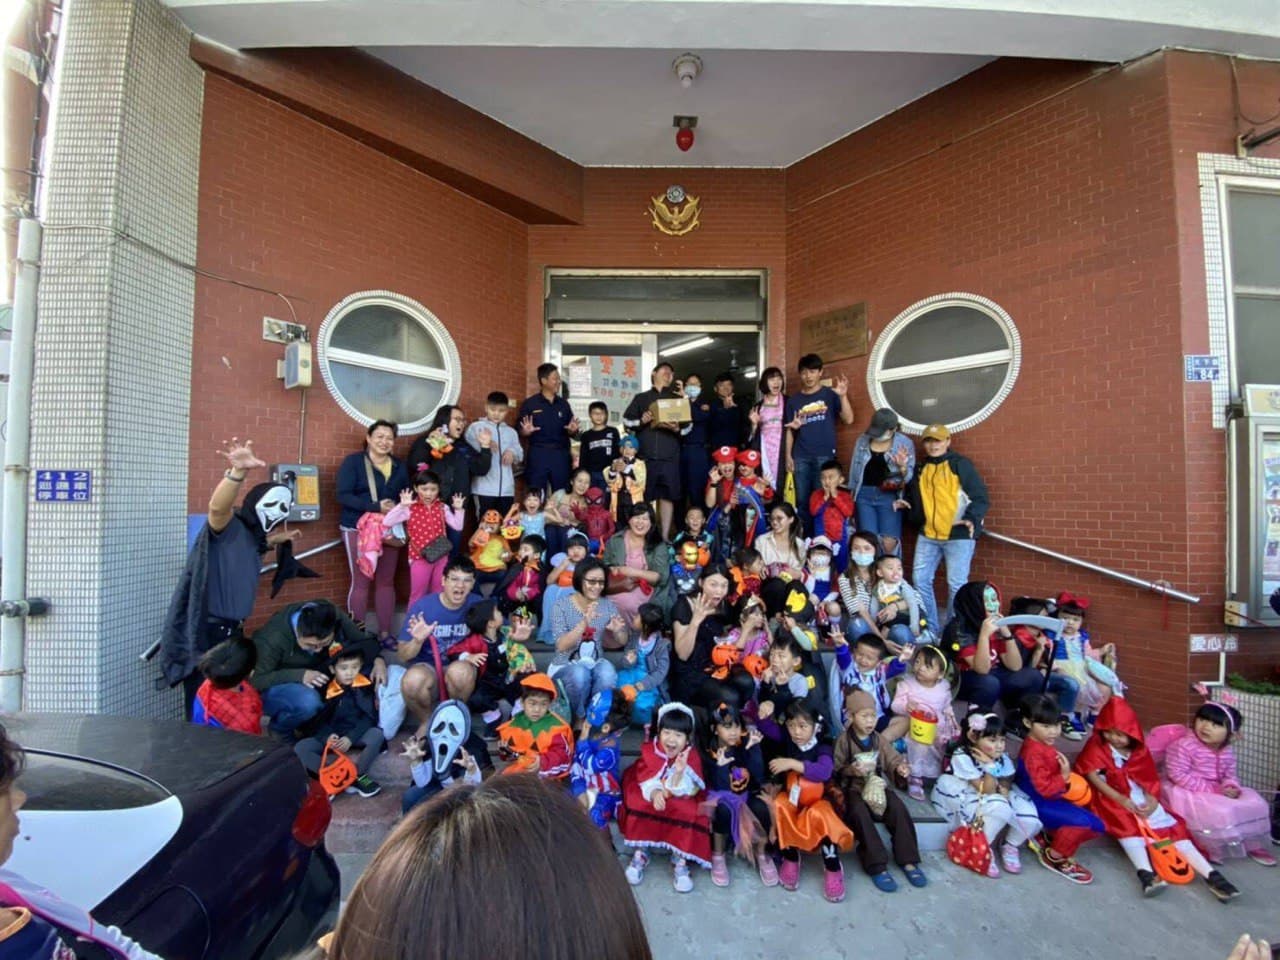 Trick or treat! Yuanli Police Station visited by kindergarten kids on Halloween